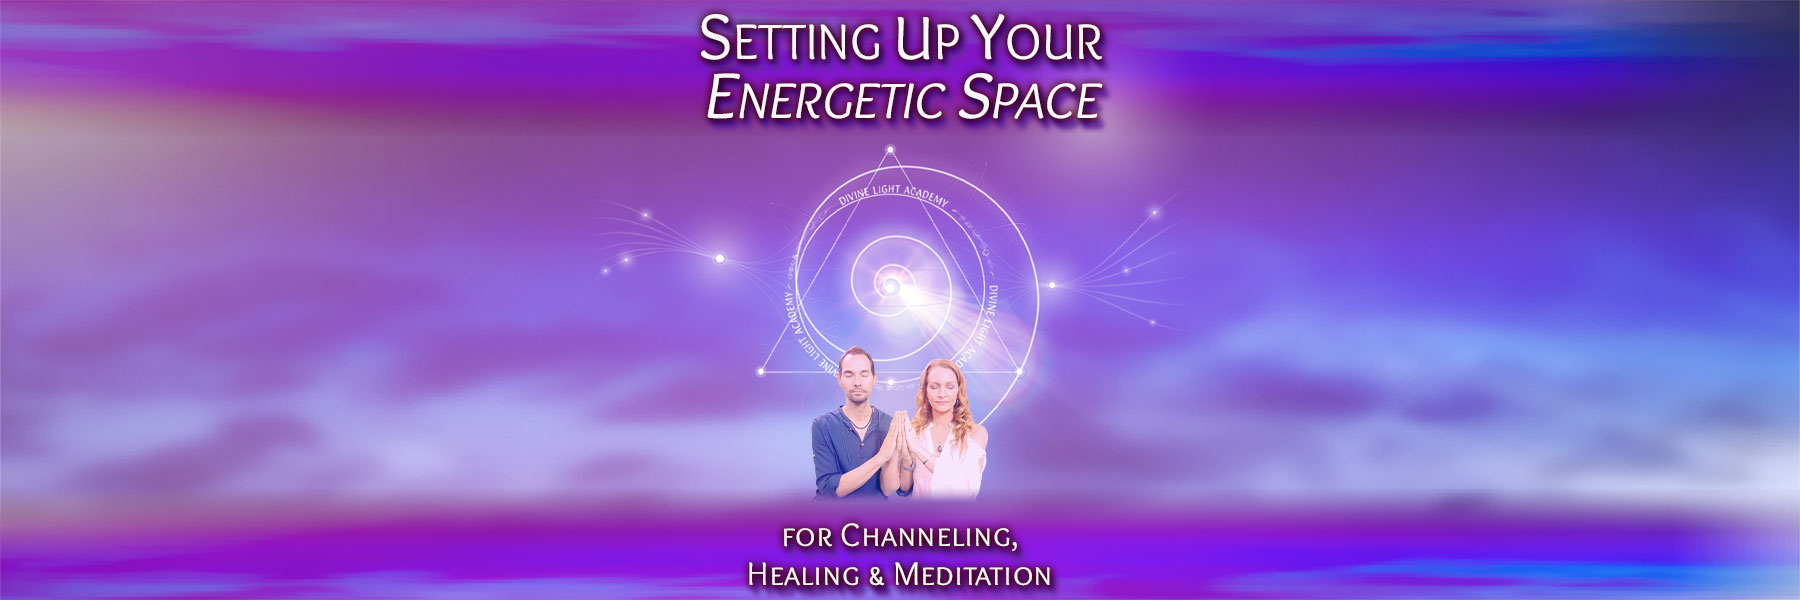 Setting Up Your Energetic Space for Channeling, Healing & Meditation